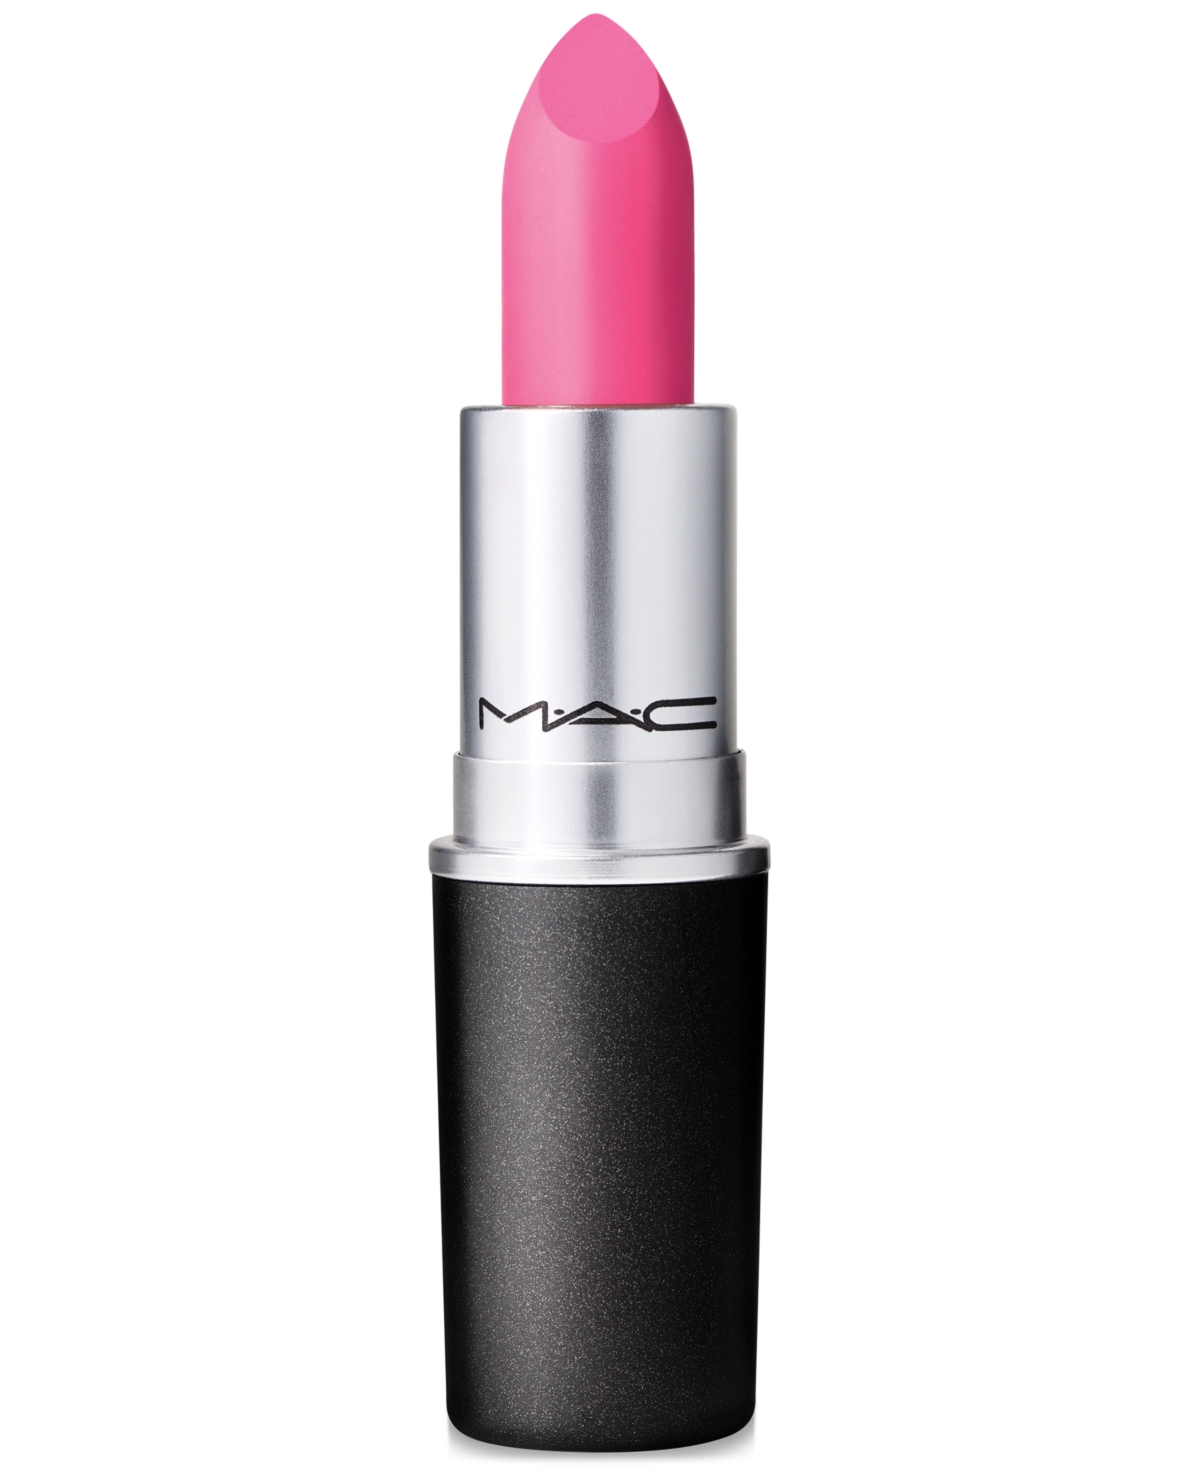 Mac Re-think Pink Amplified Lipstick In Do Not Disturb (bright Raspberry With Ye